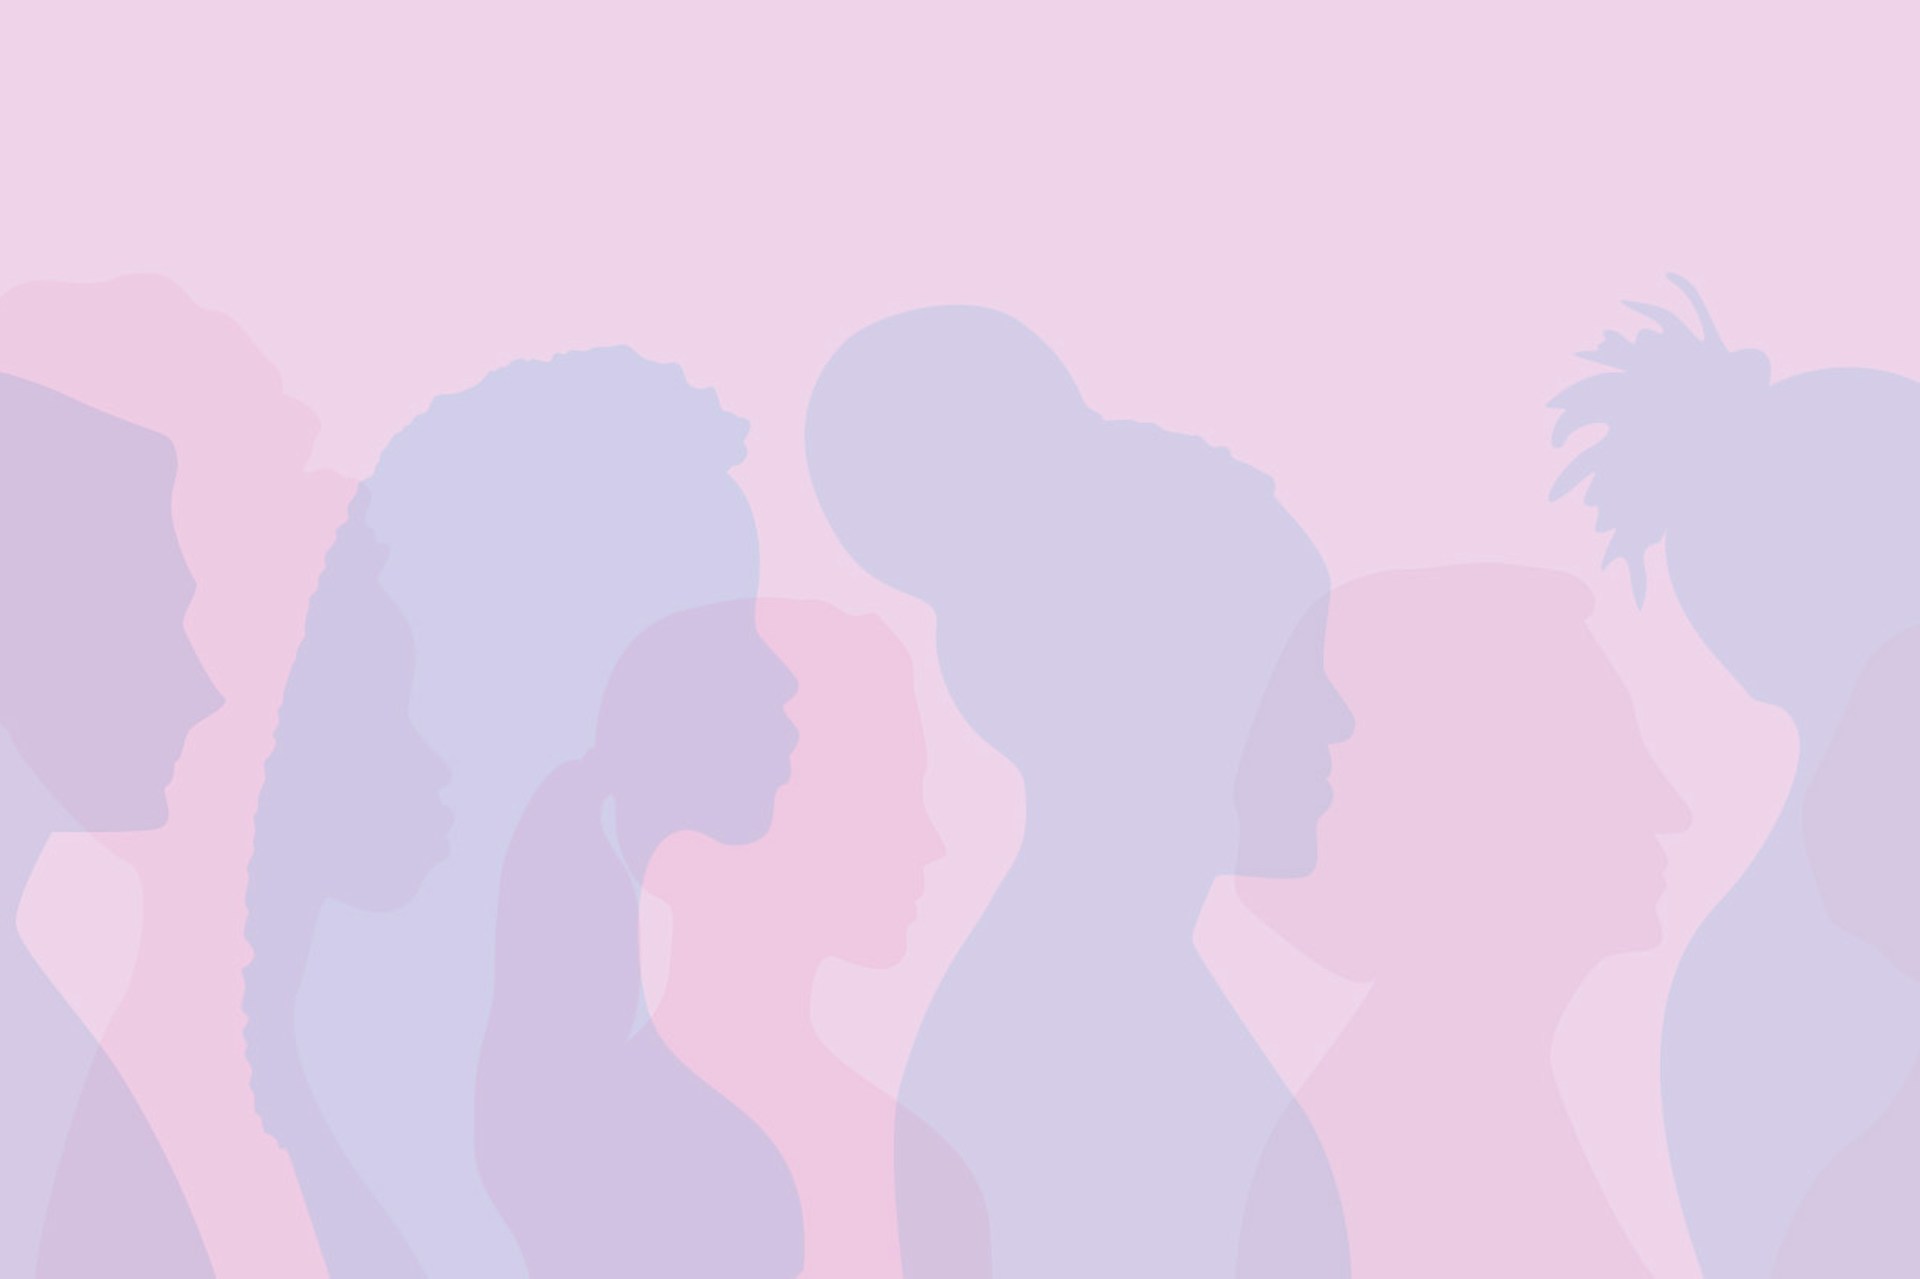 Silhouettes of different women from a number of cultures and backgrounds. This image is being used for a blog on International Women's Day 2022 from Meltwater.